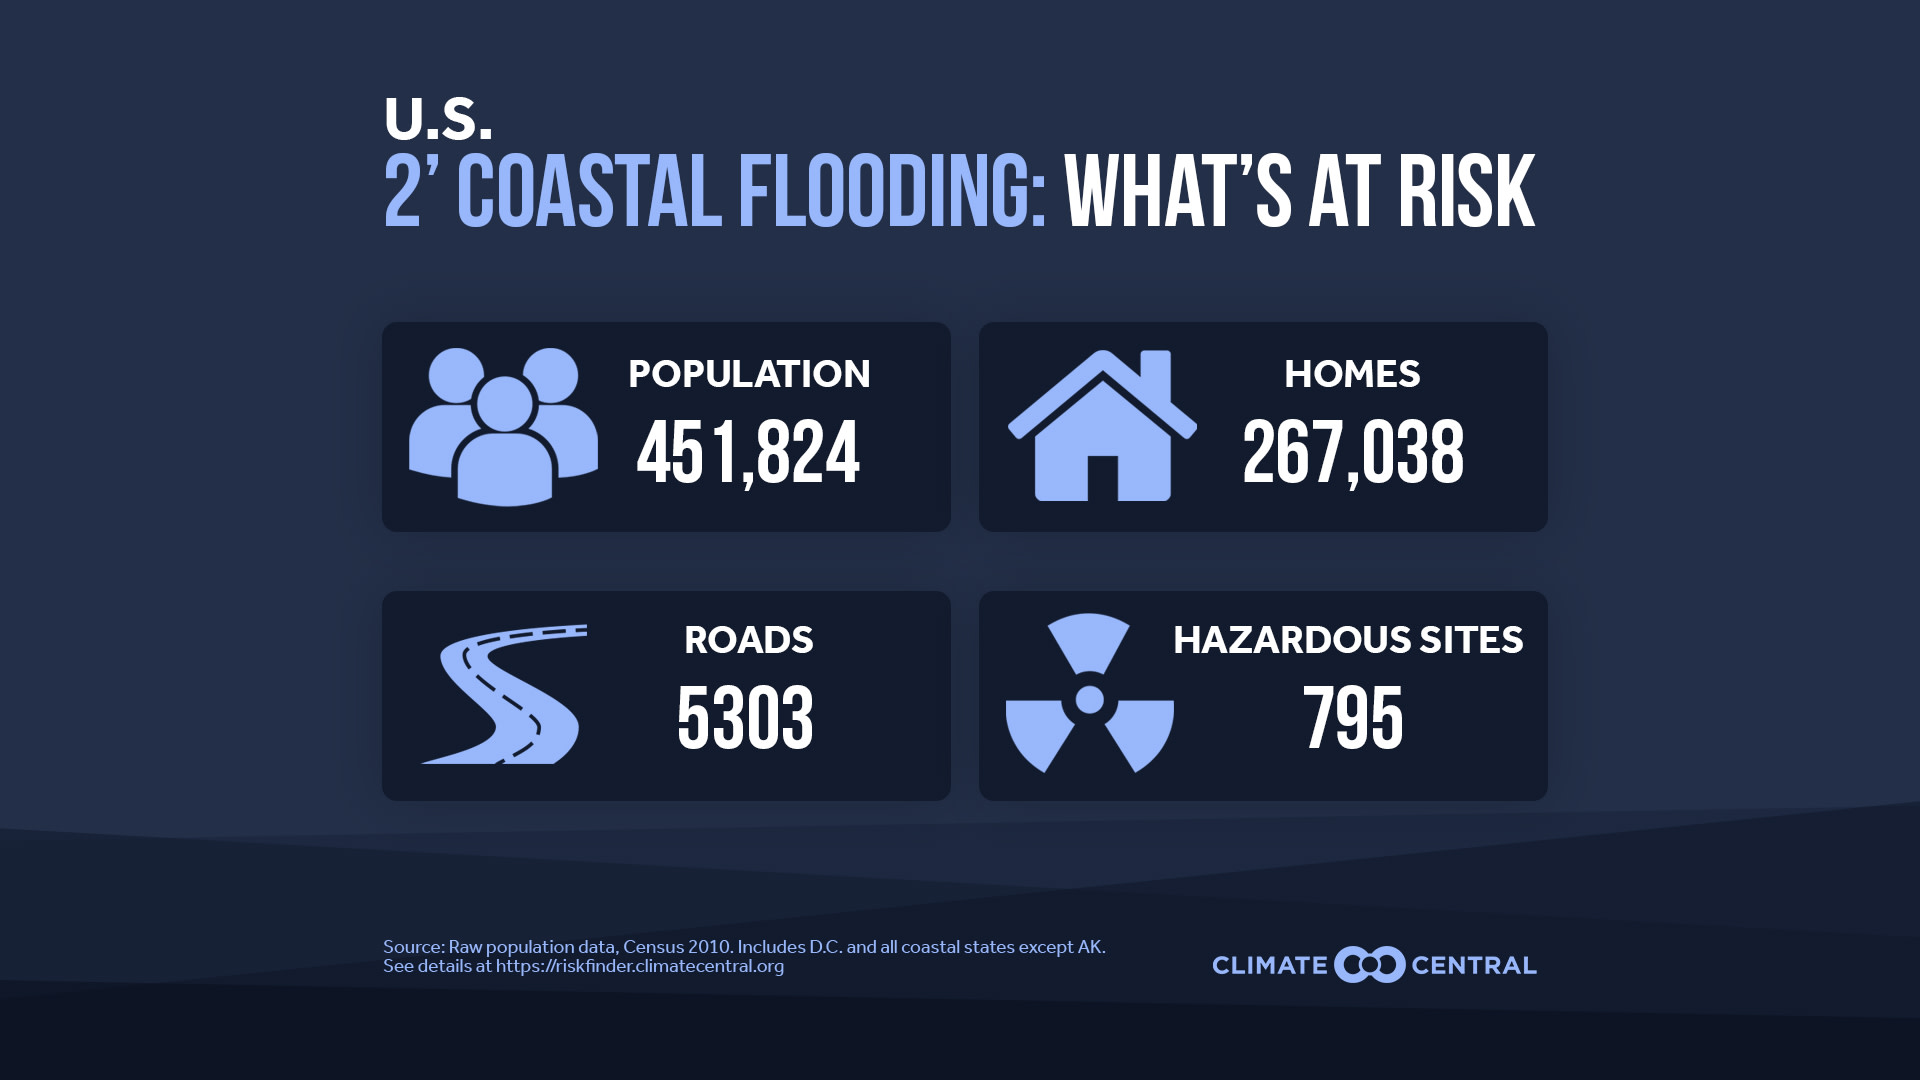 What's at risk (National) - More Frequent and Pervasive Coastal Flooding